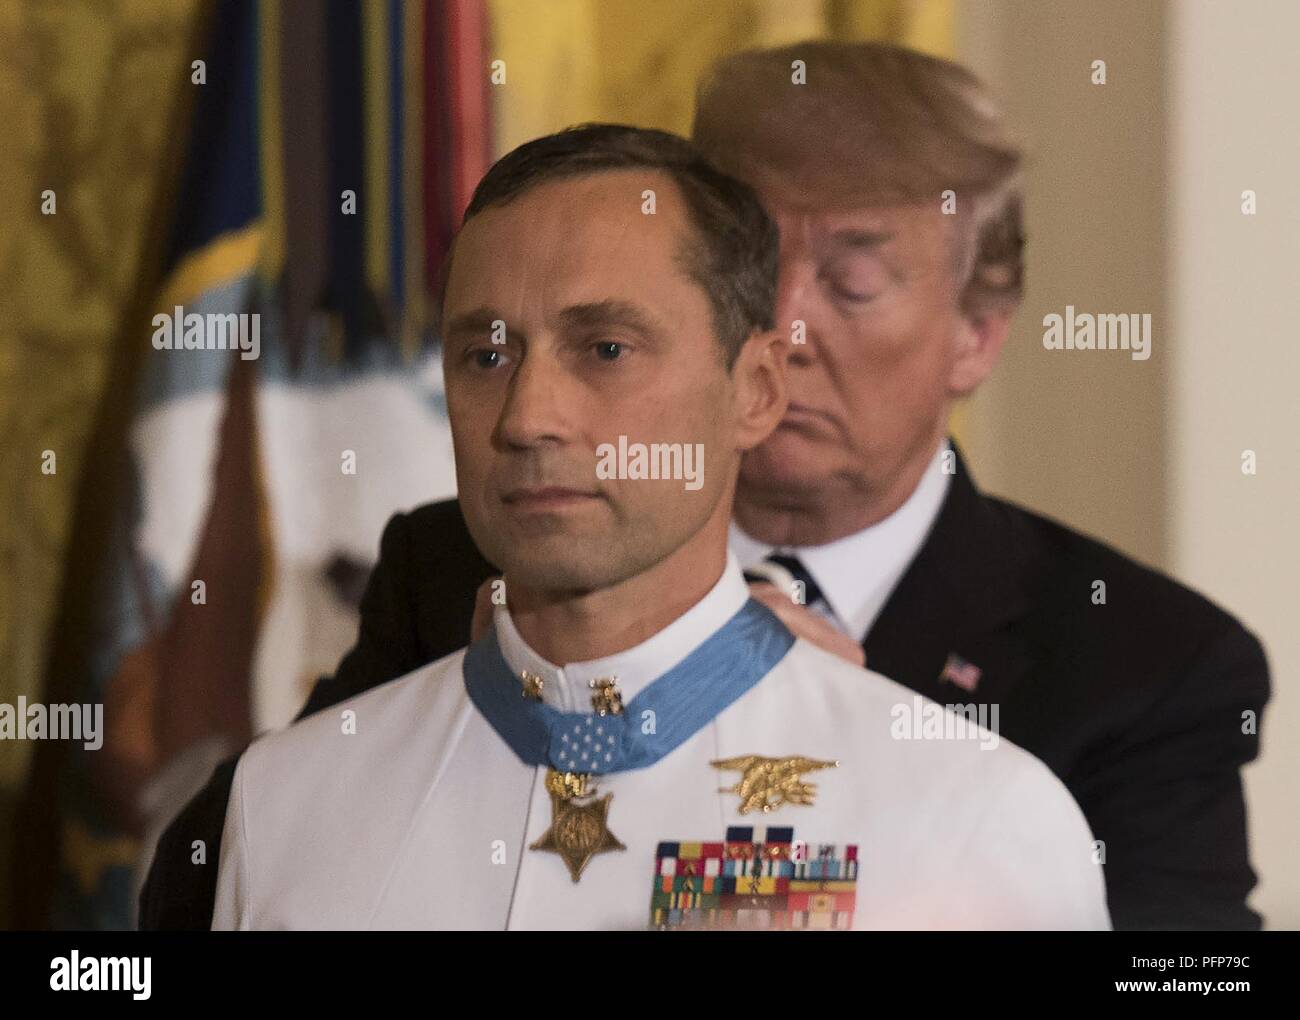 (May 24, 2018) President Donald J. Trump presents the Medal of Honor to retired Master Chief Special Warfare Operator (SEAL) Britt Slabinski during a ceremony at the White House in Washington, D.C. Slabinski received the Medal of Honor for his actions during Operation Anaconda in Afghanistan in March 2002. Stock Photo